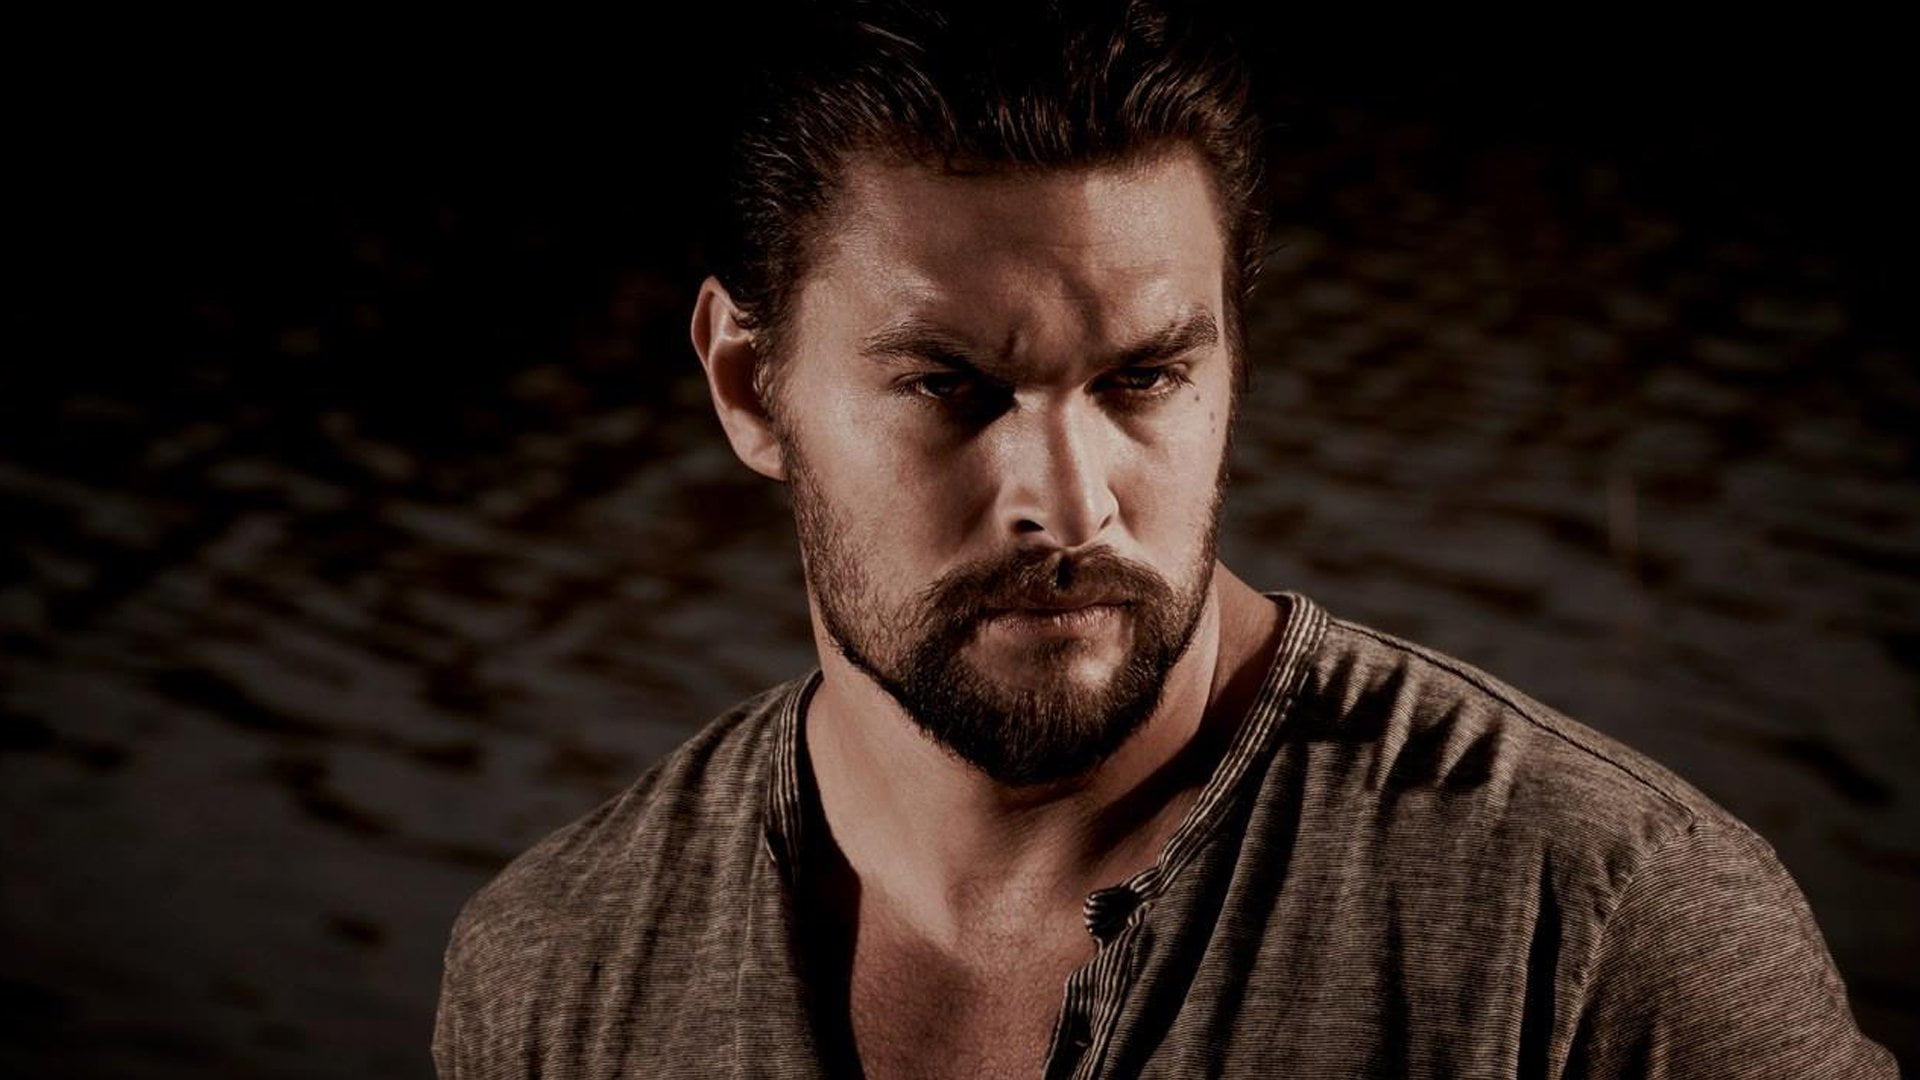 TV Show, The Red Road, Jason Momoa, headshot, portrait, one person